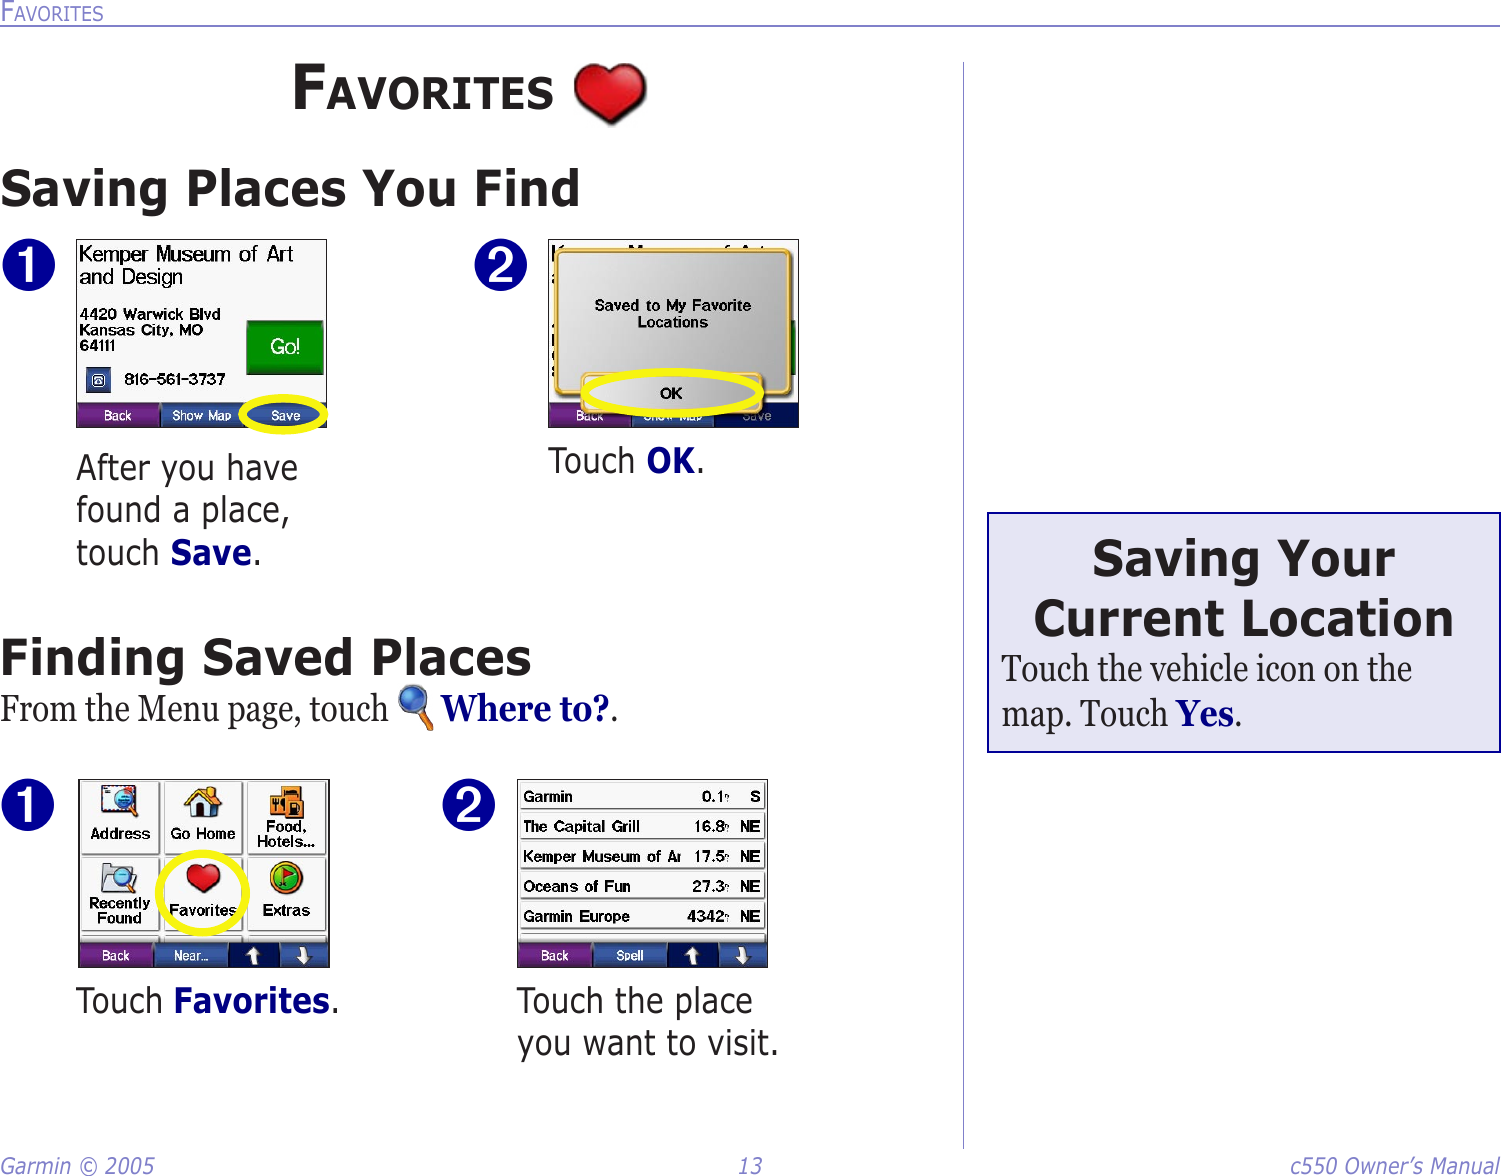 Garmin © 2005  13  c550 Owner’s ManualFAVORITESFAVORITES Saving Places You Find➊After you have found a place, touch Save. ➋Touch OK. Finding Saved PlacesFrom the Menu page, touch   Where to?.Touch Favorites.  Touch the place you want to visit.➋➊Saving Your Current LocationTouch the vehicle icon on the map. Touch Yes. 